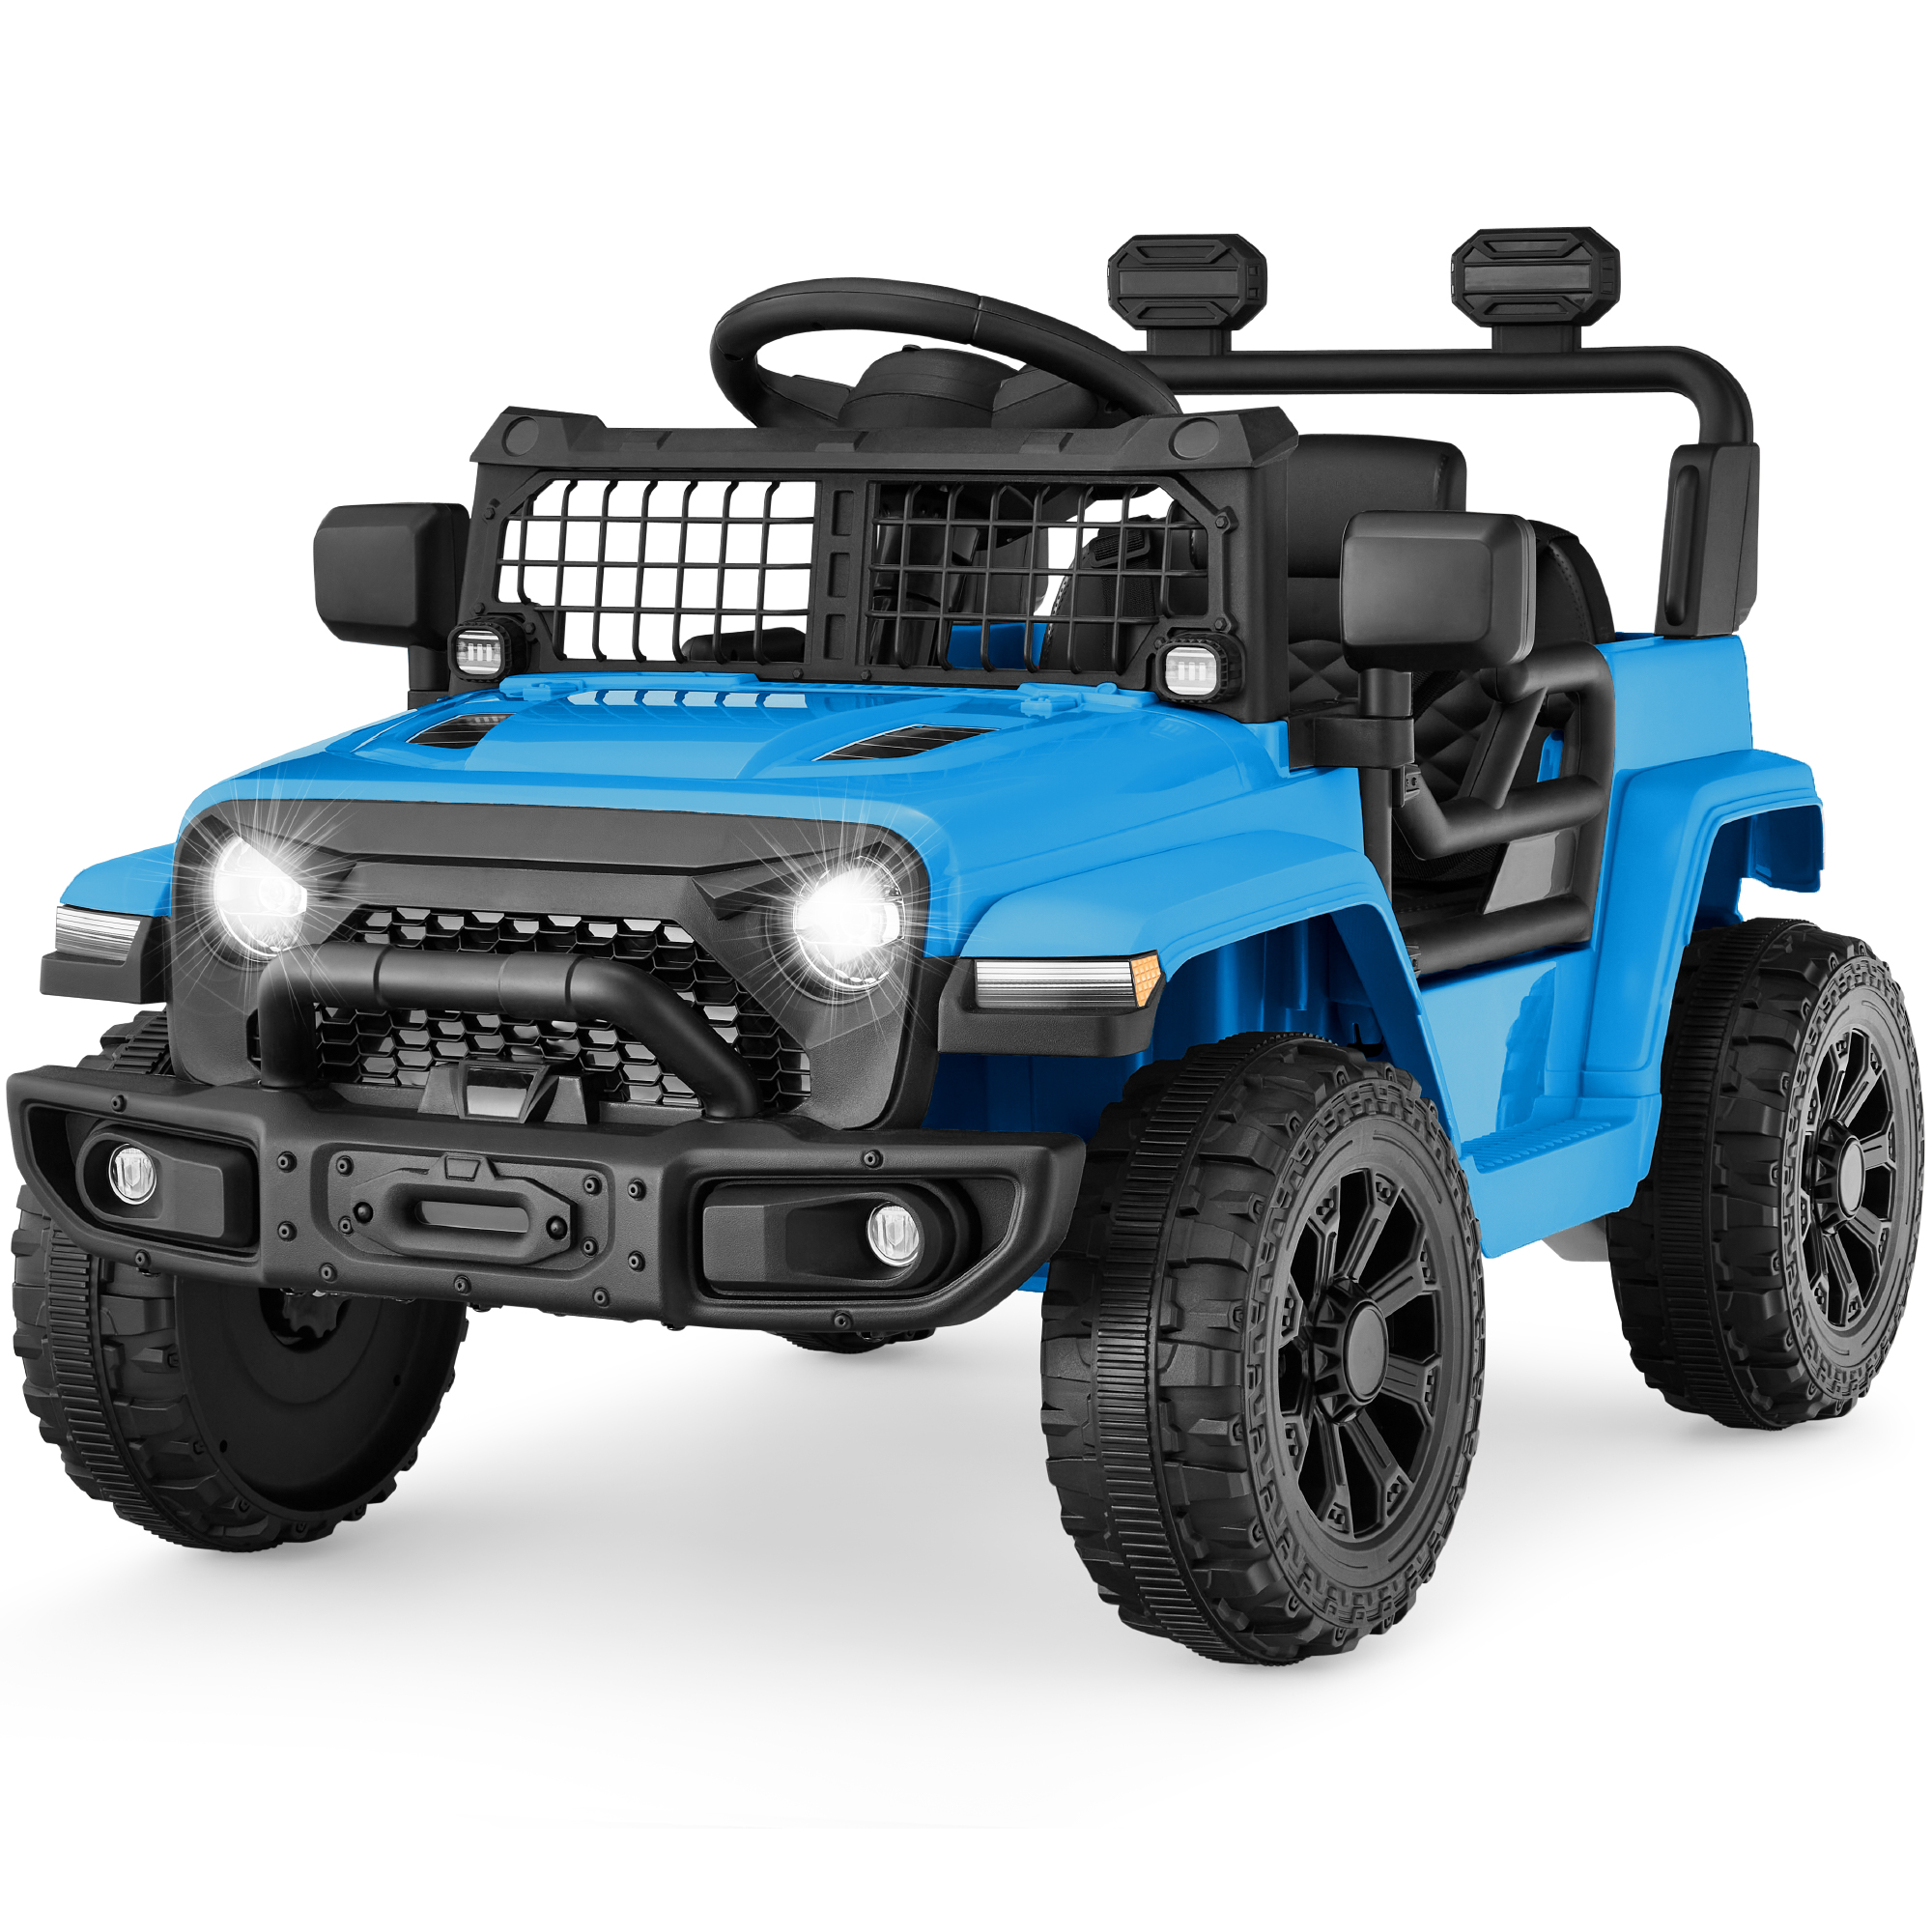 Best Choice Products 6V Kids Ride-On Truck Car w/ Parent Remote Control, 4-Wheel Suspension, LED Lights - Light Blue - image 1 of 8